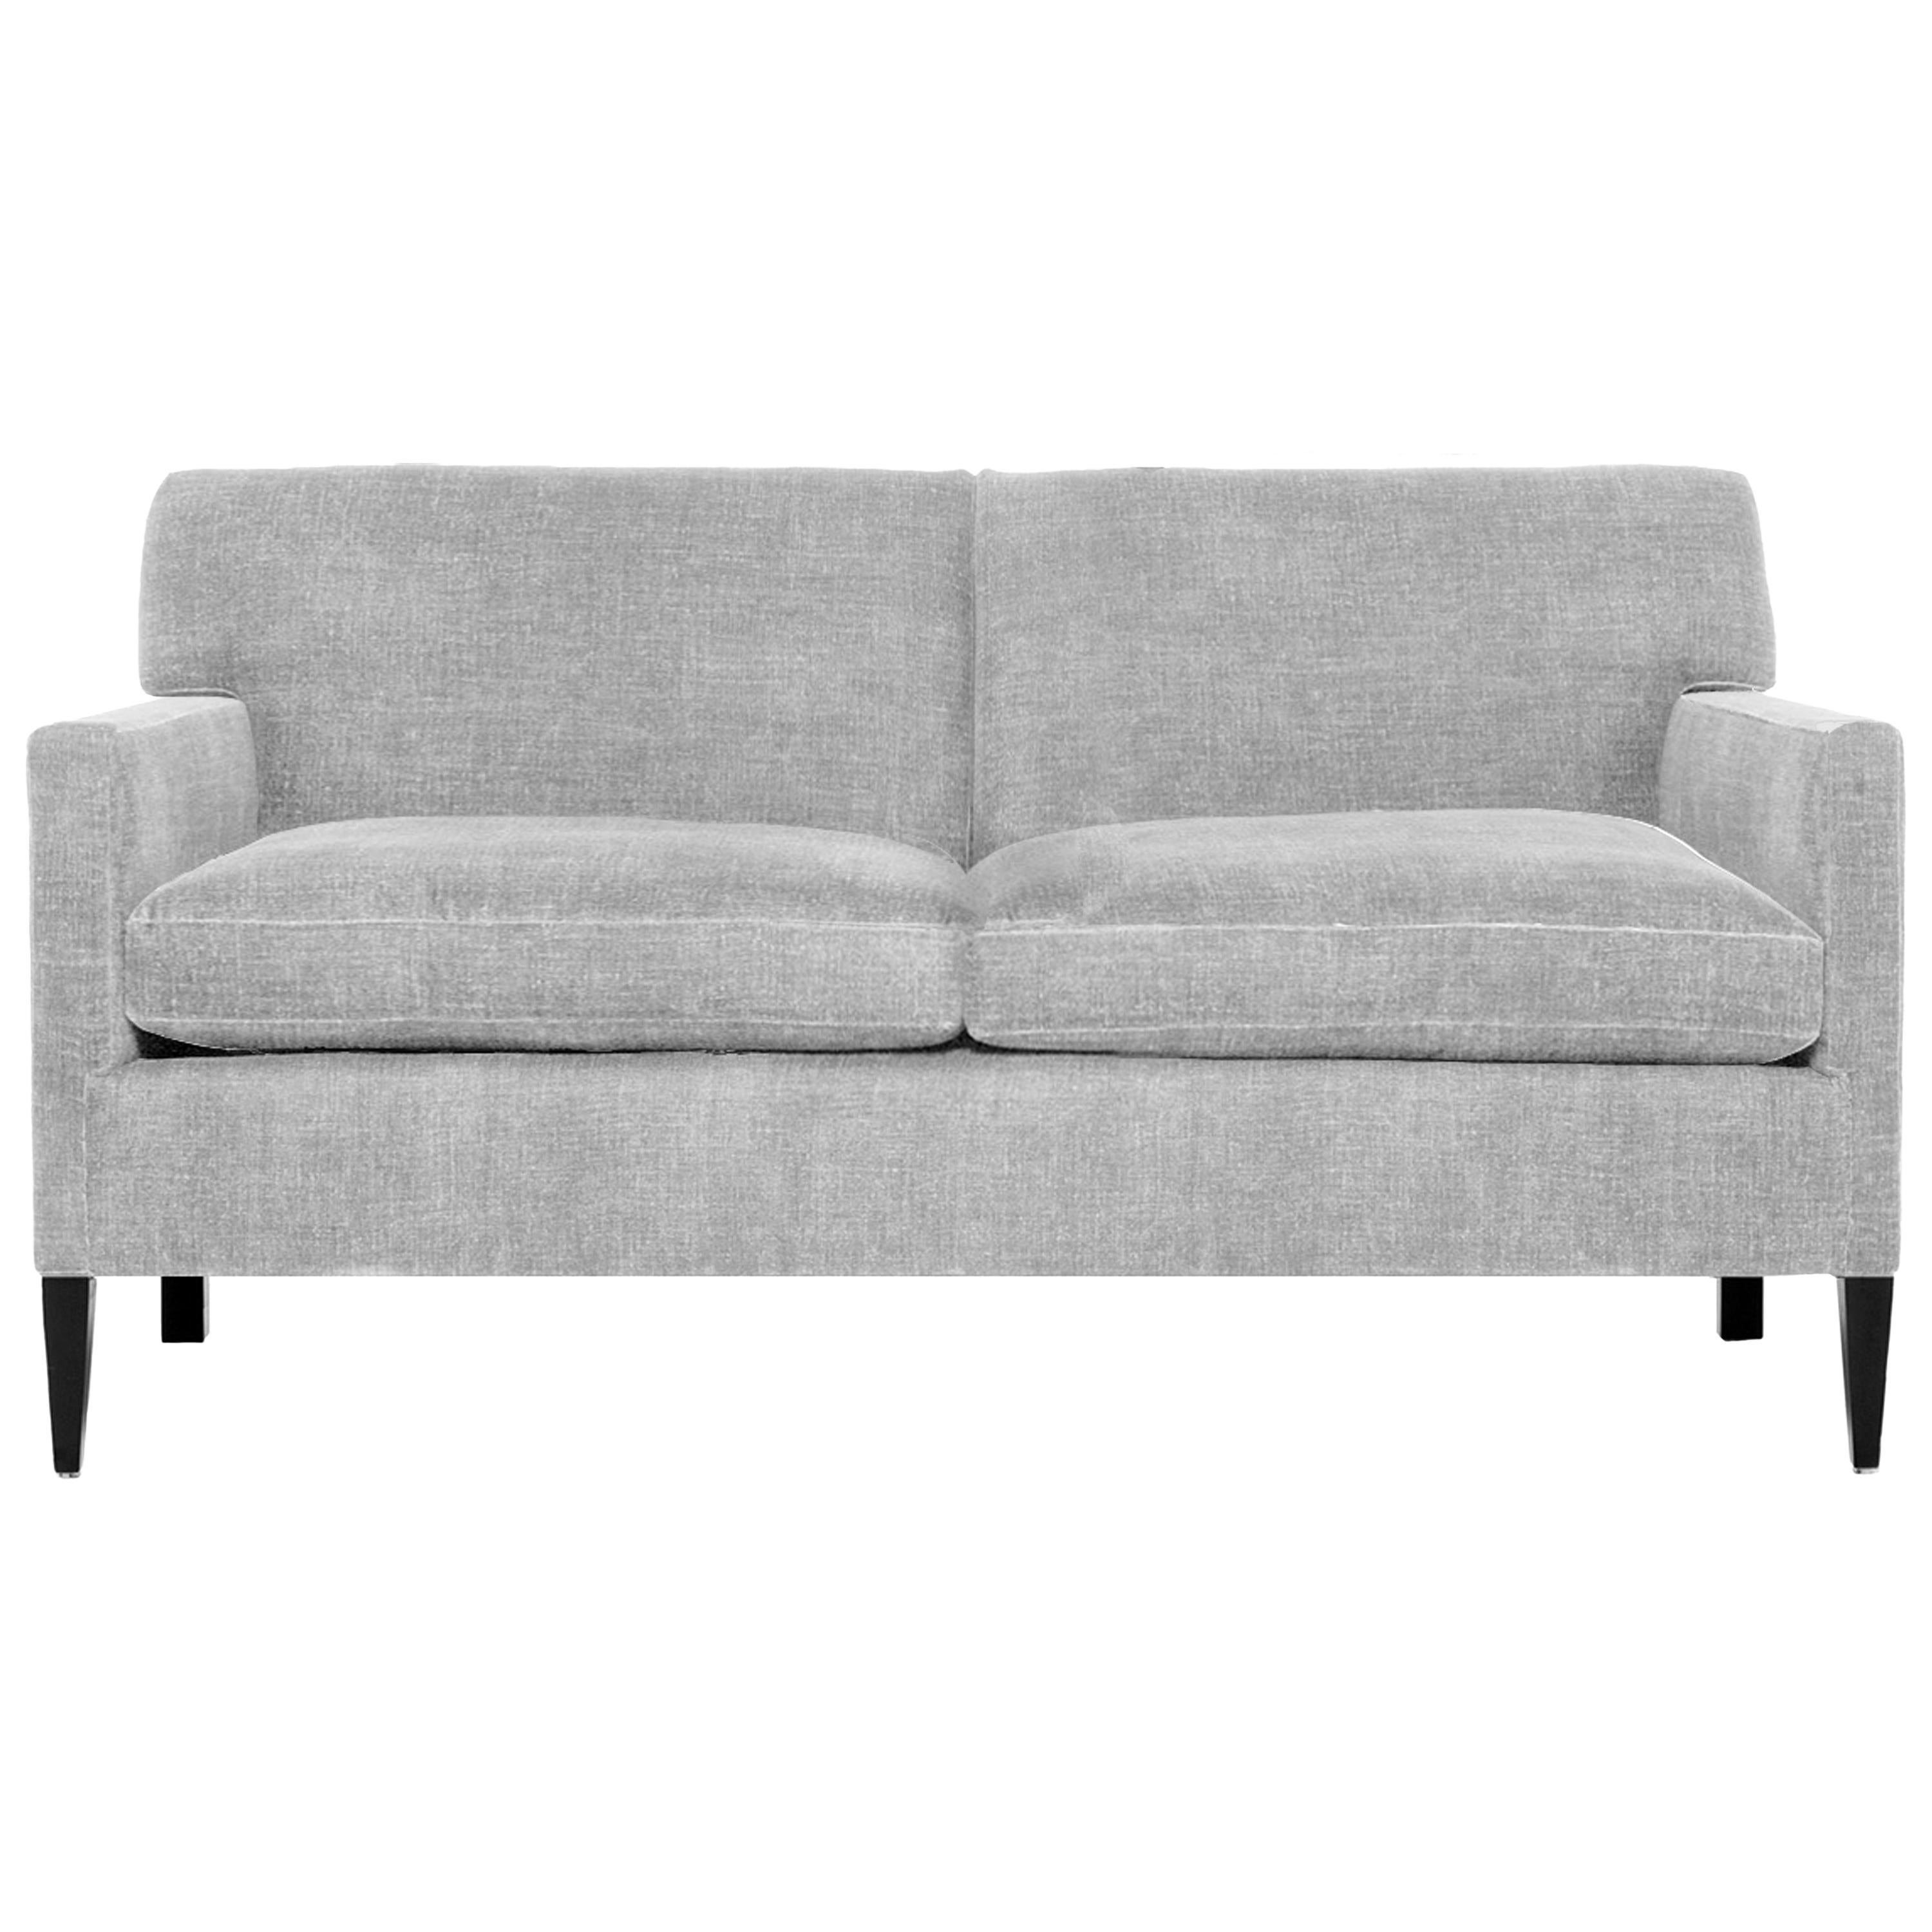 T-Back Upholstered 60" Sofa in Wool, Vica Designed by Annabelle Selldorf